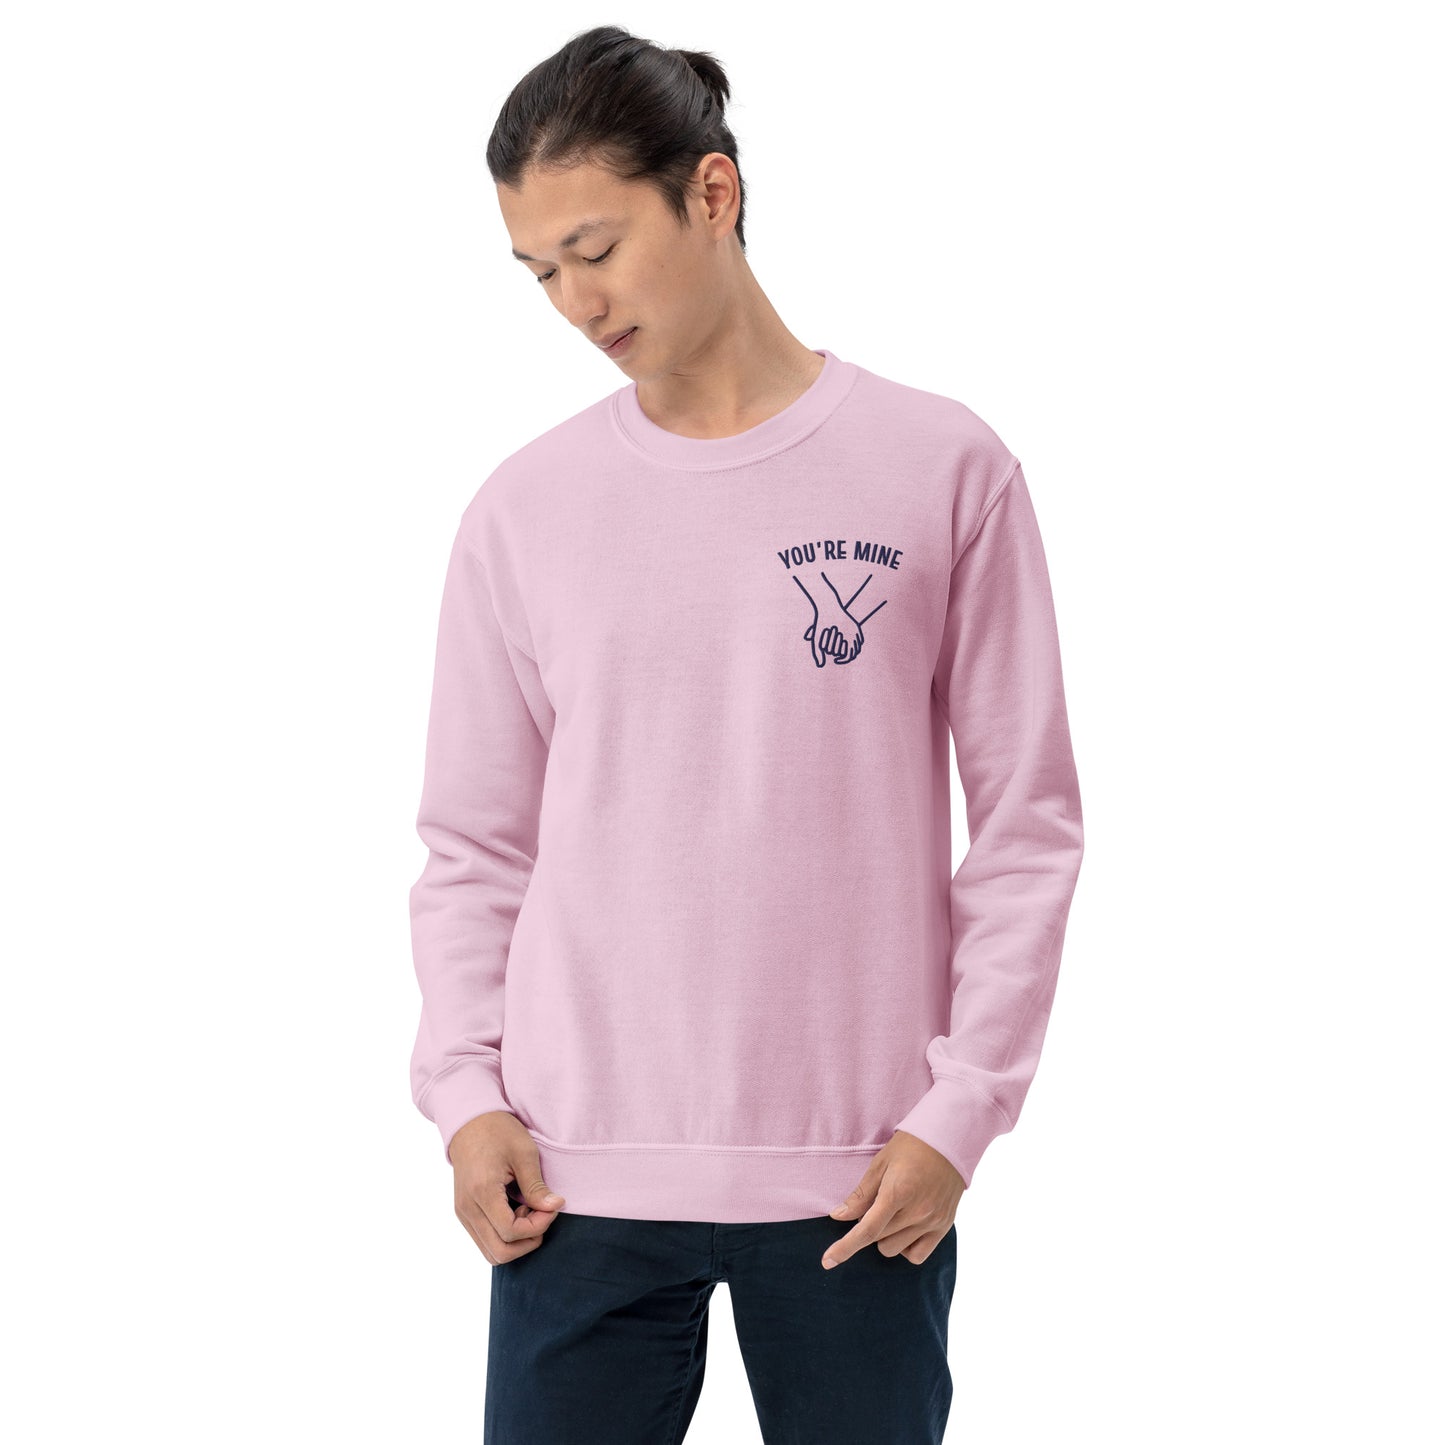 Forever yours, You're mine Couple Sweatshirts - Navy/Pink Embroidered